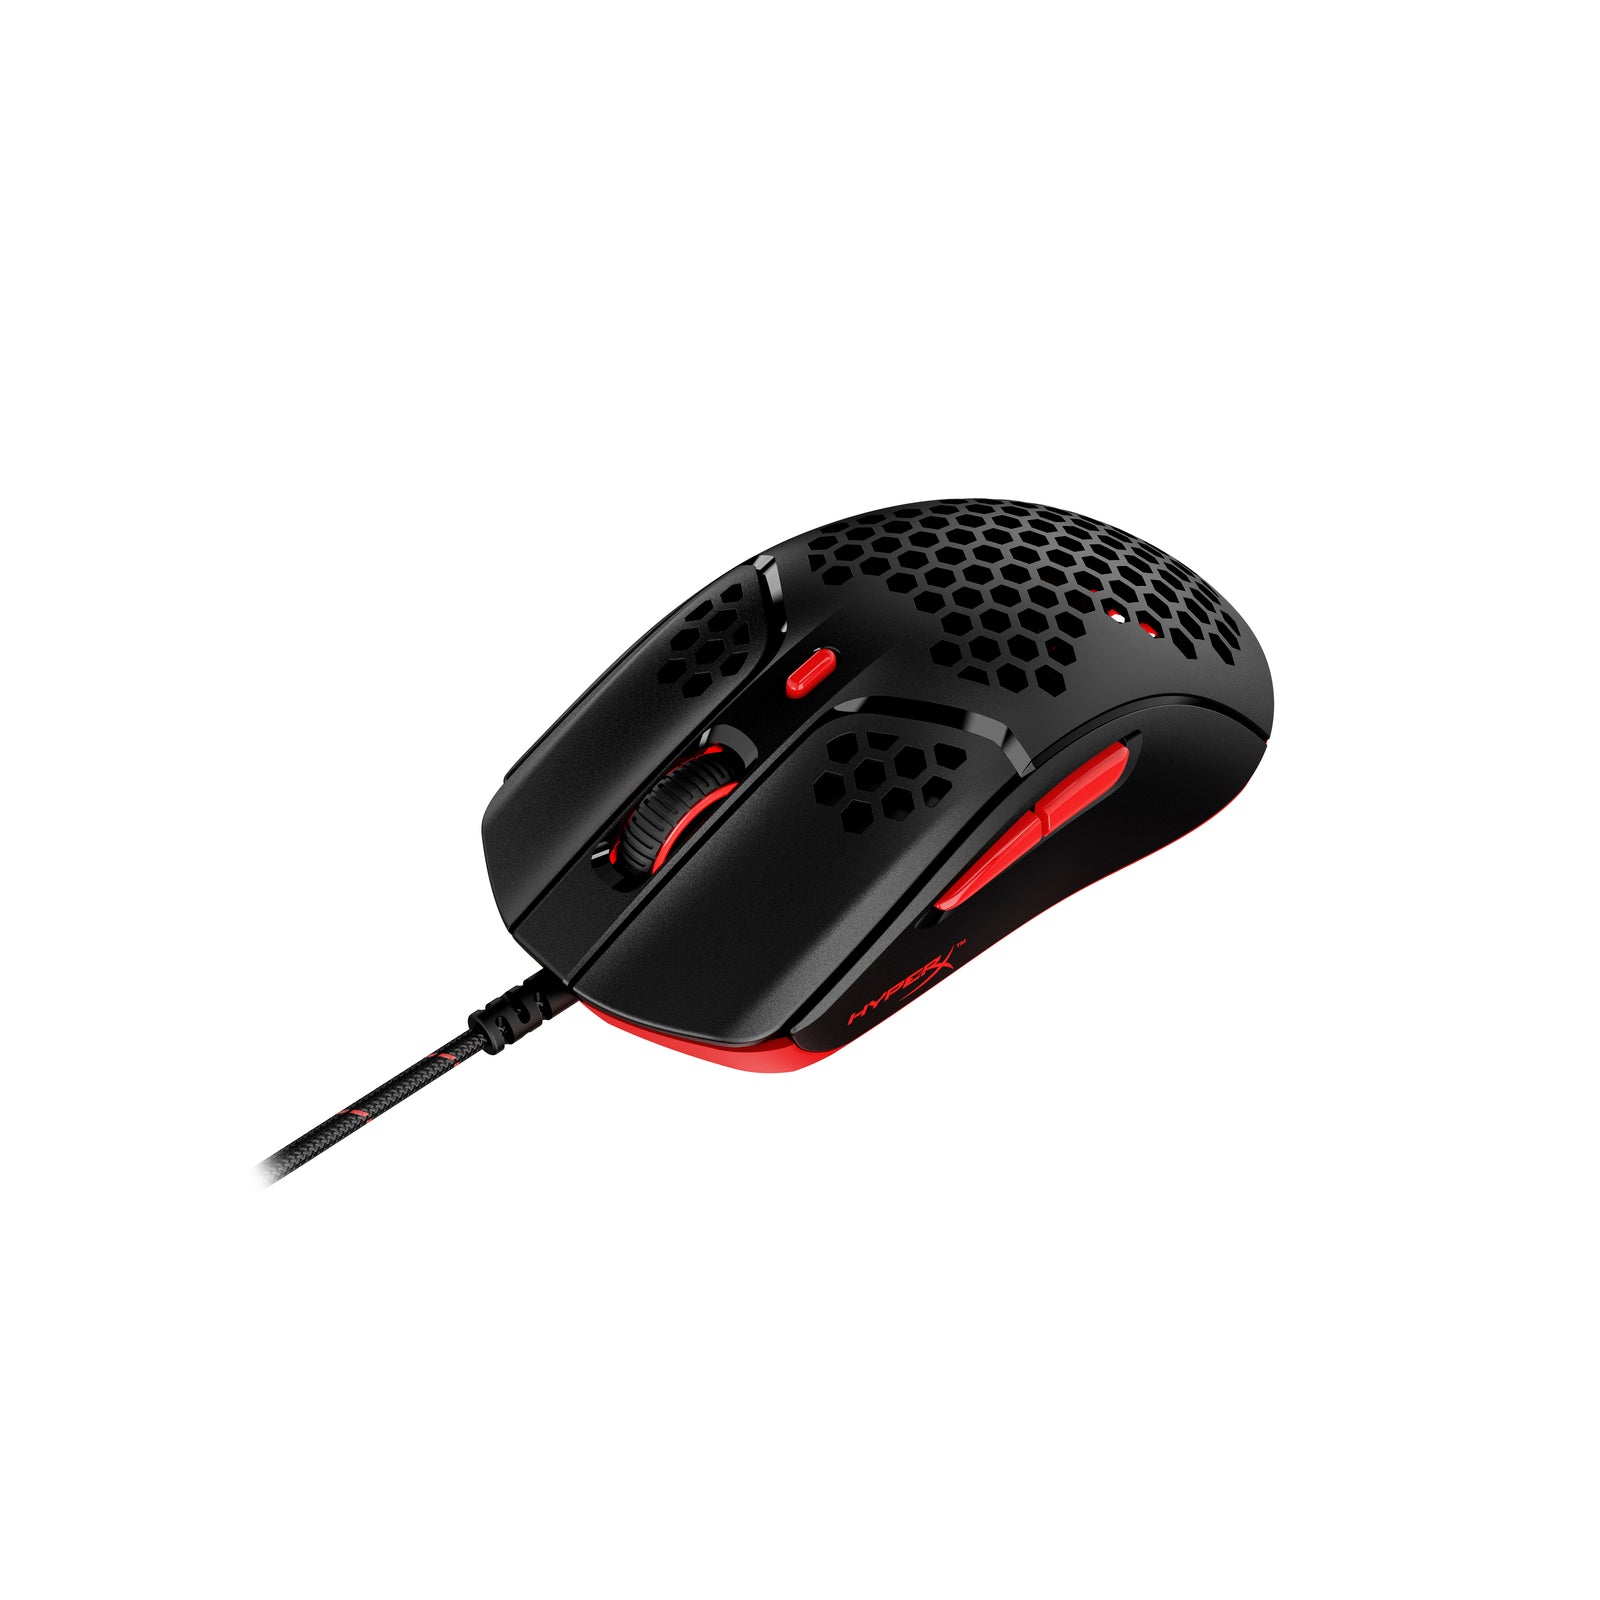 HyperX Pulsefire Haste Wireless Gaming Mouse for PC - Black